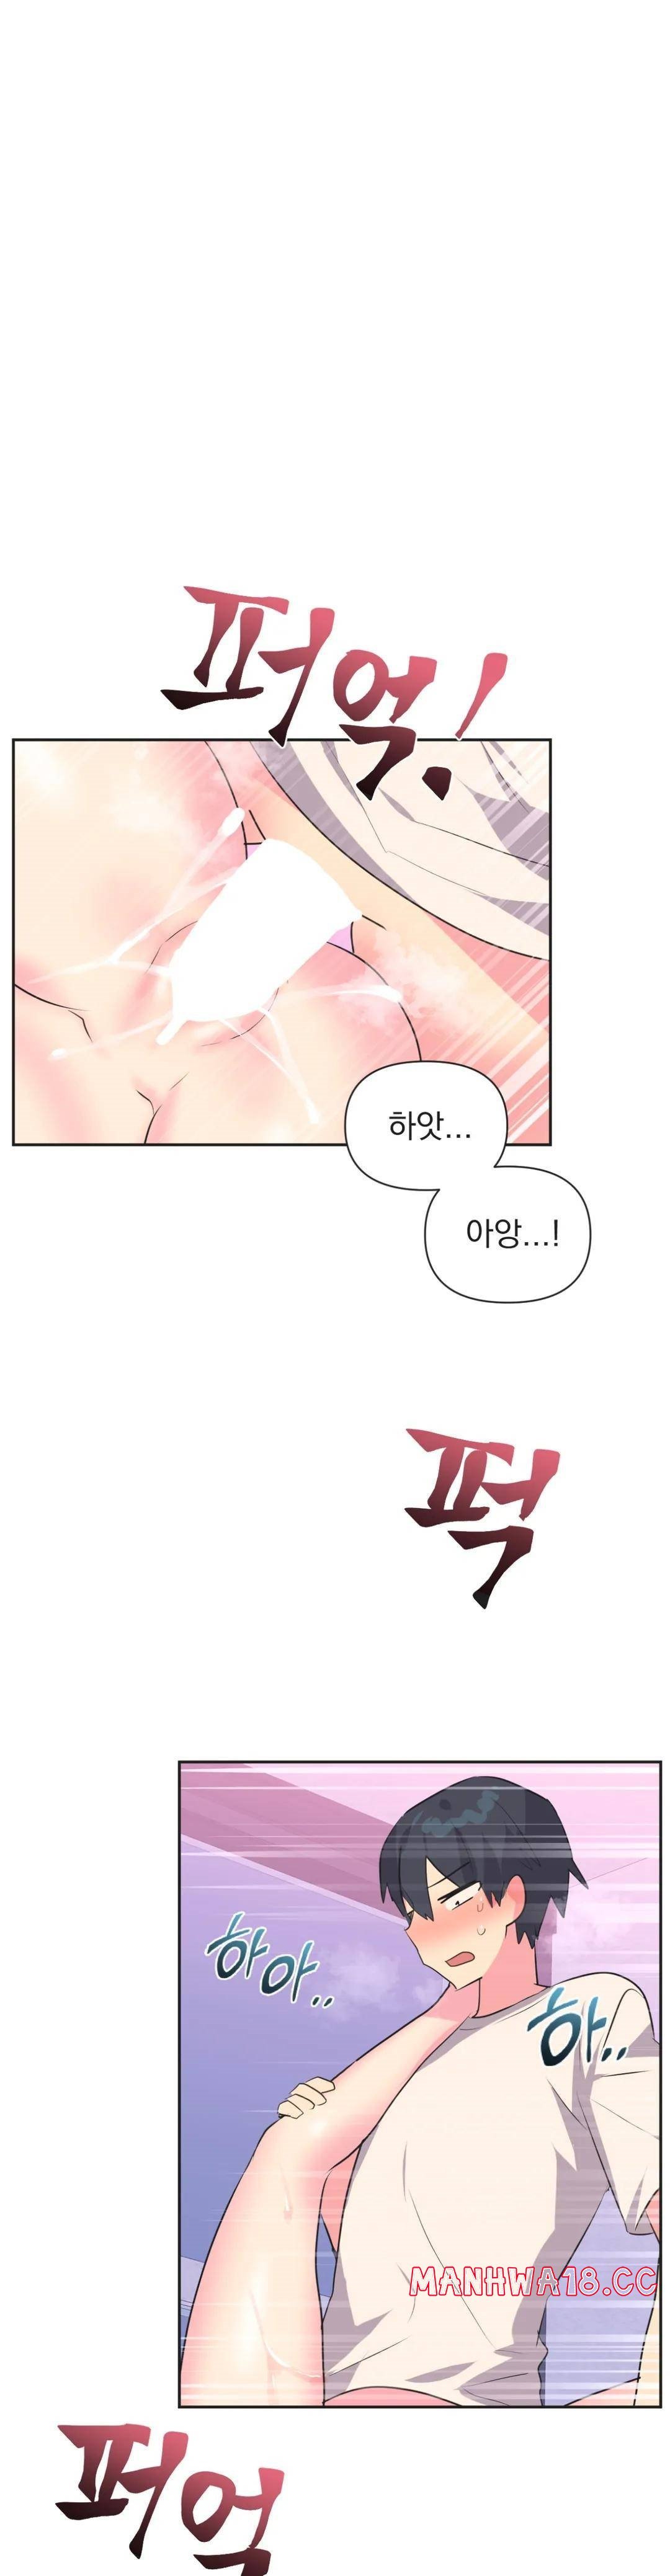 release-raw-chap-8-6